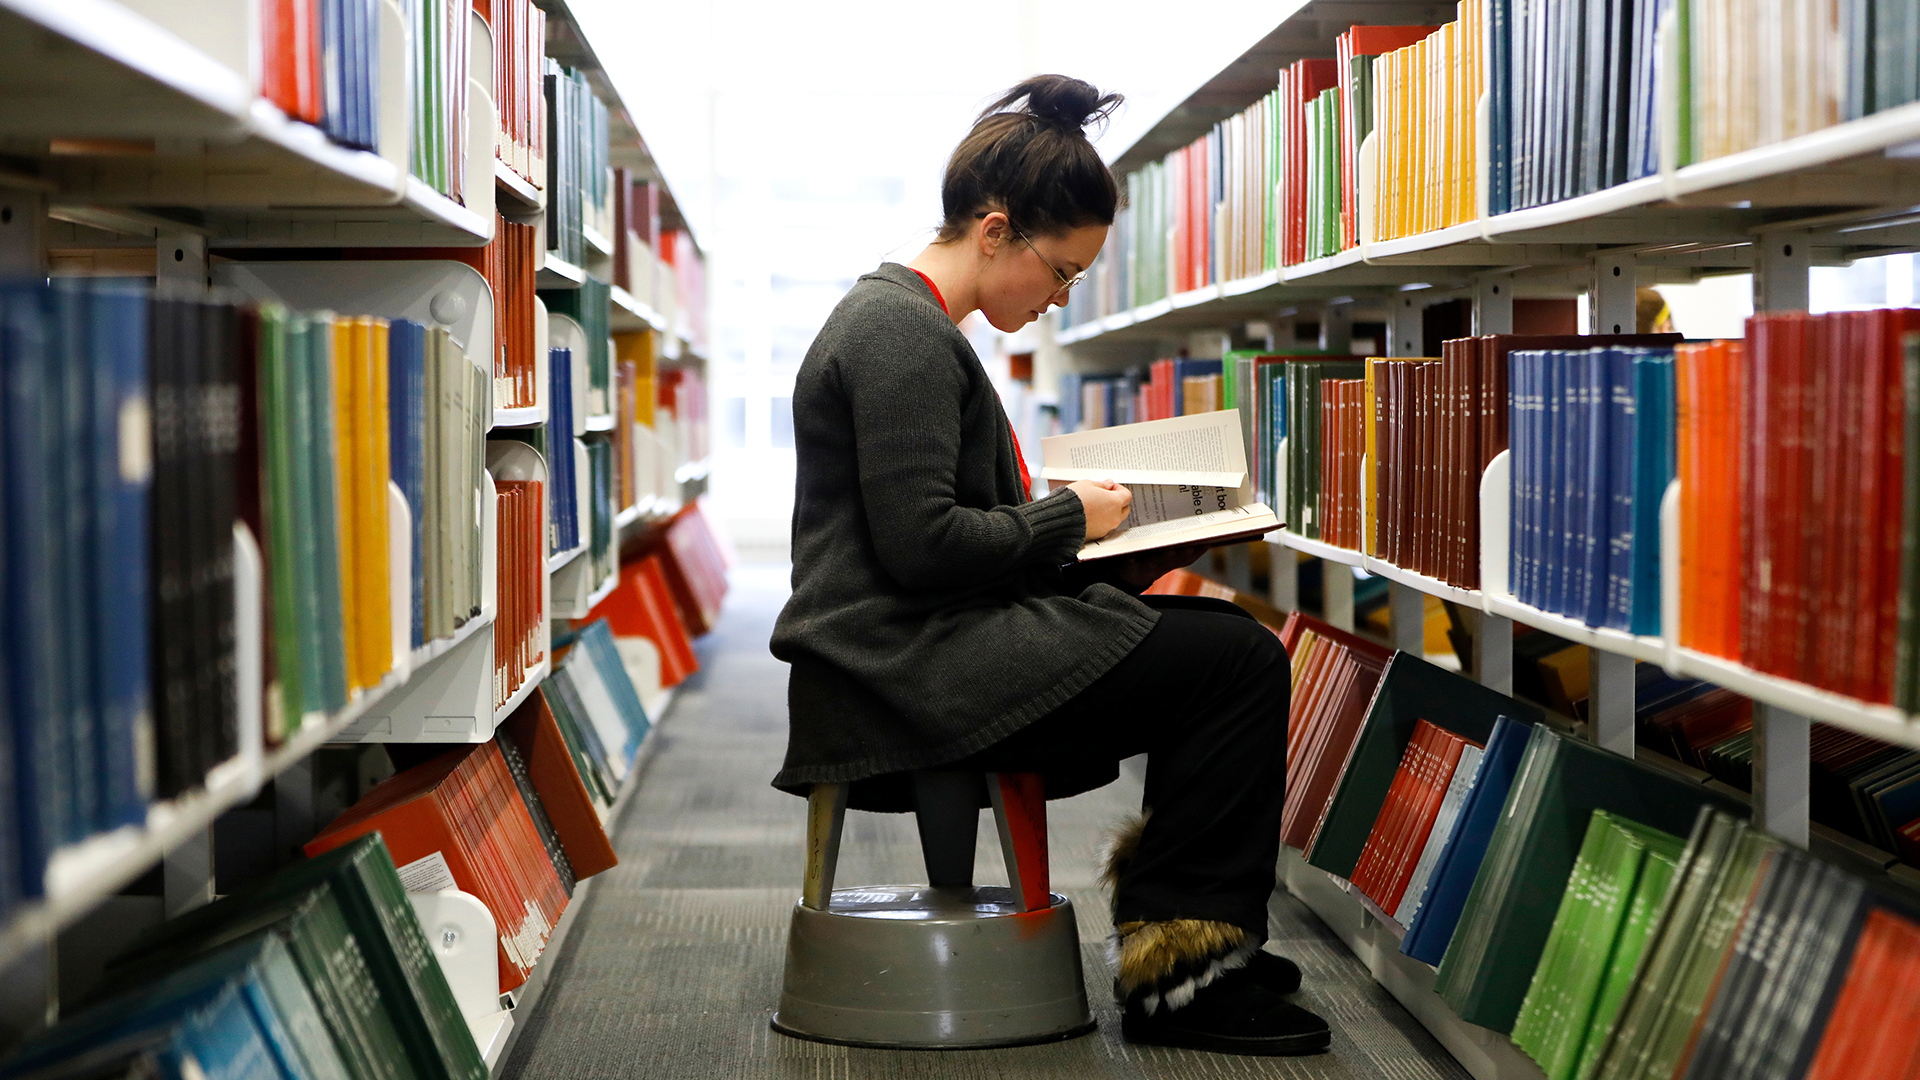 Student reads a book among the shelves at the Auraria Library